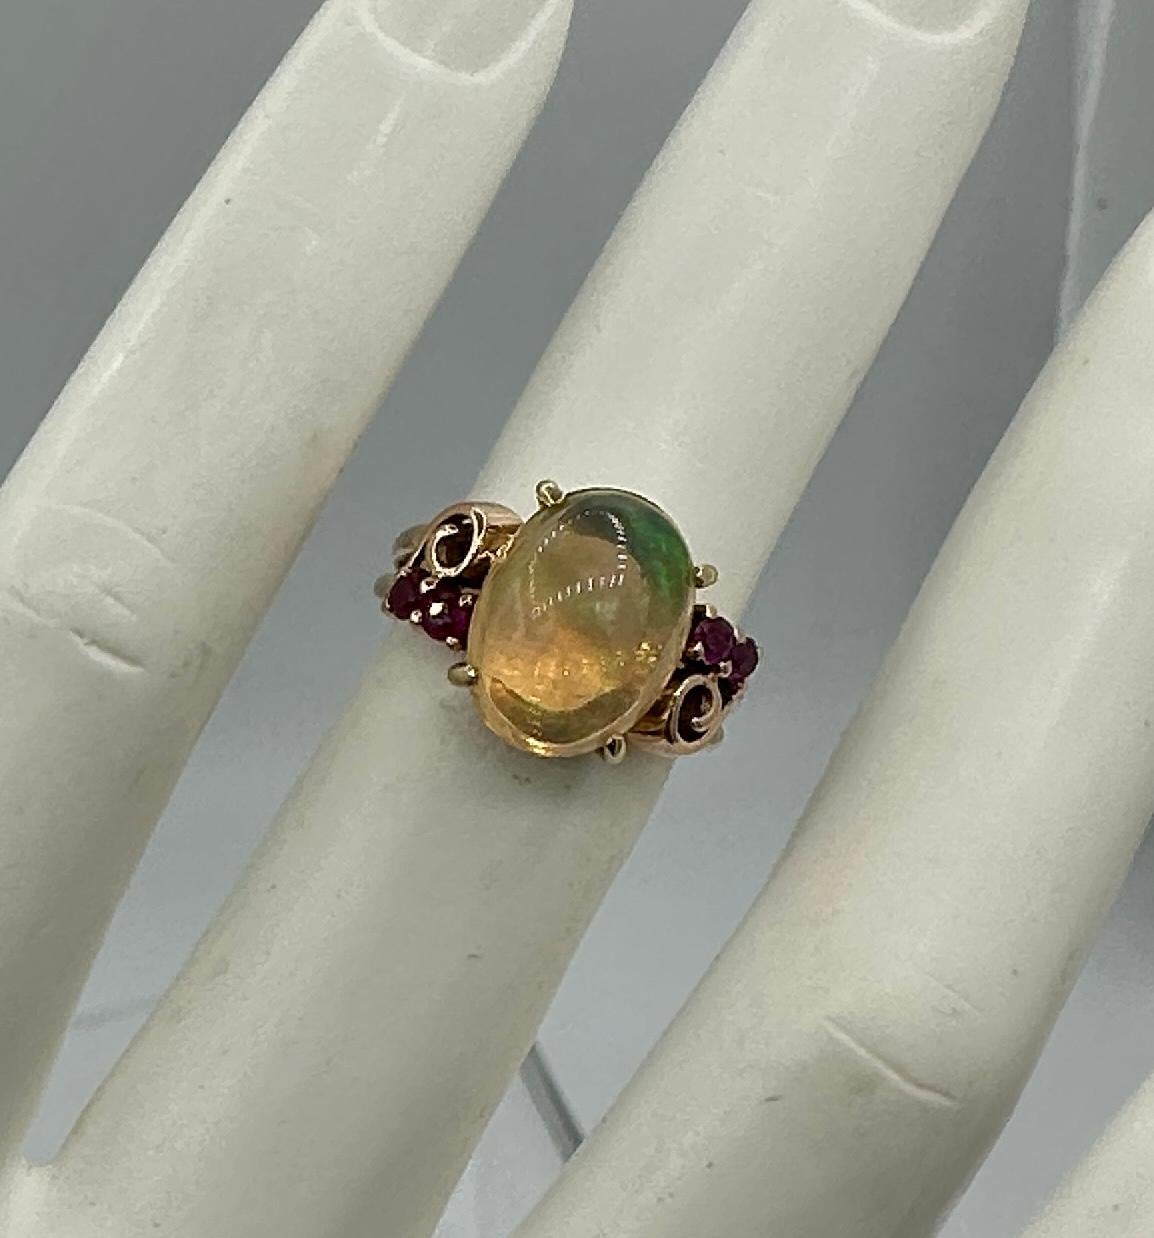 4 Carat Mexican Fire Opal Ruby Ring 14 Karat Gold Art Deco Retro Cocktail Ring In Excellent Condition For Sale In New York, NY